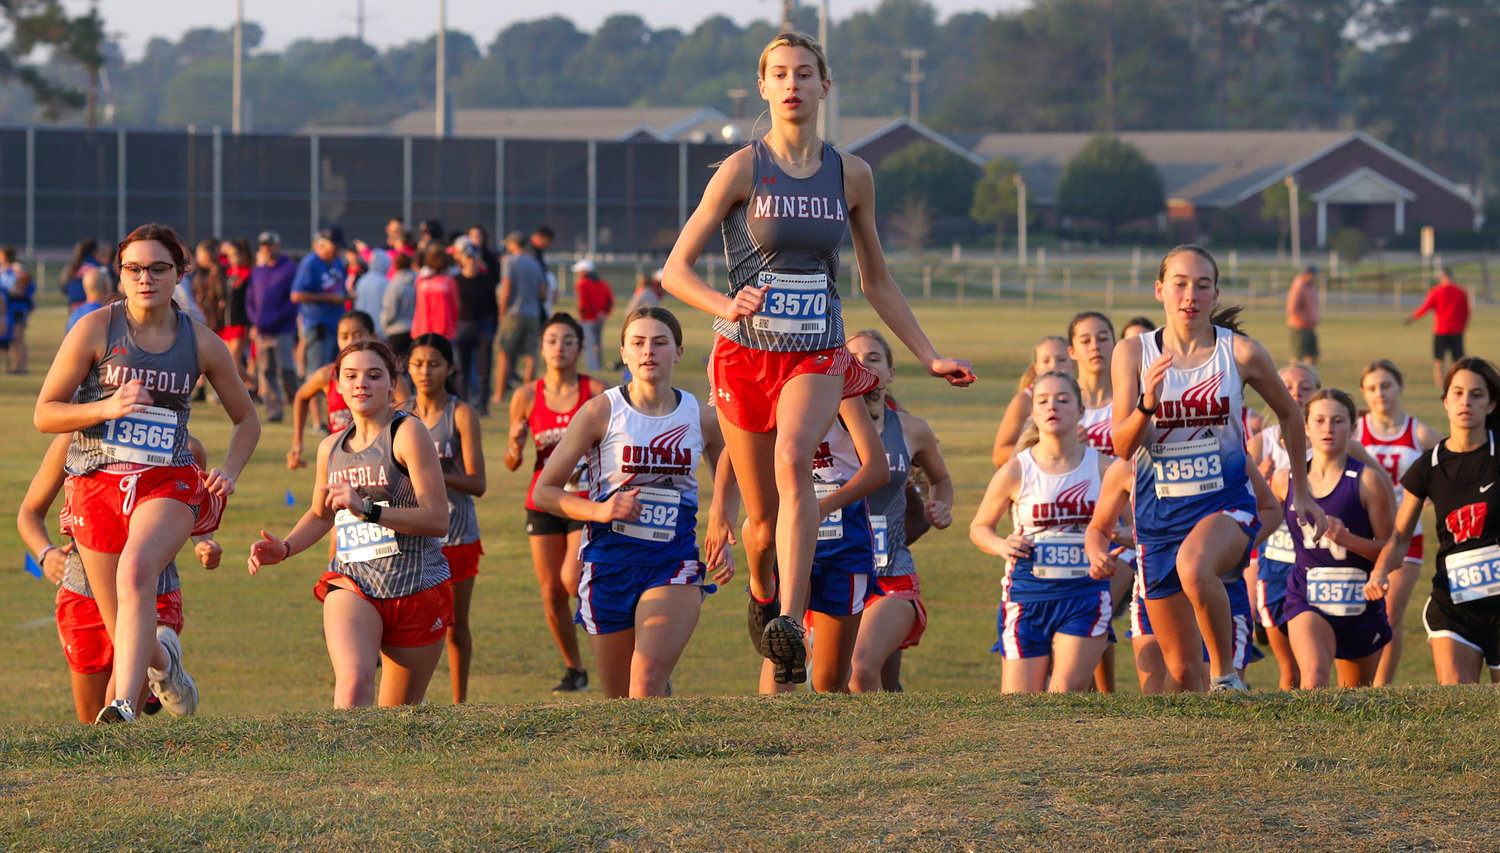 The varsity girls field tops a hillock at the start of the race, led by Olivia Hughes of Mineola, her teammates, as well as the Quitman girls, who went on to win the meet.